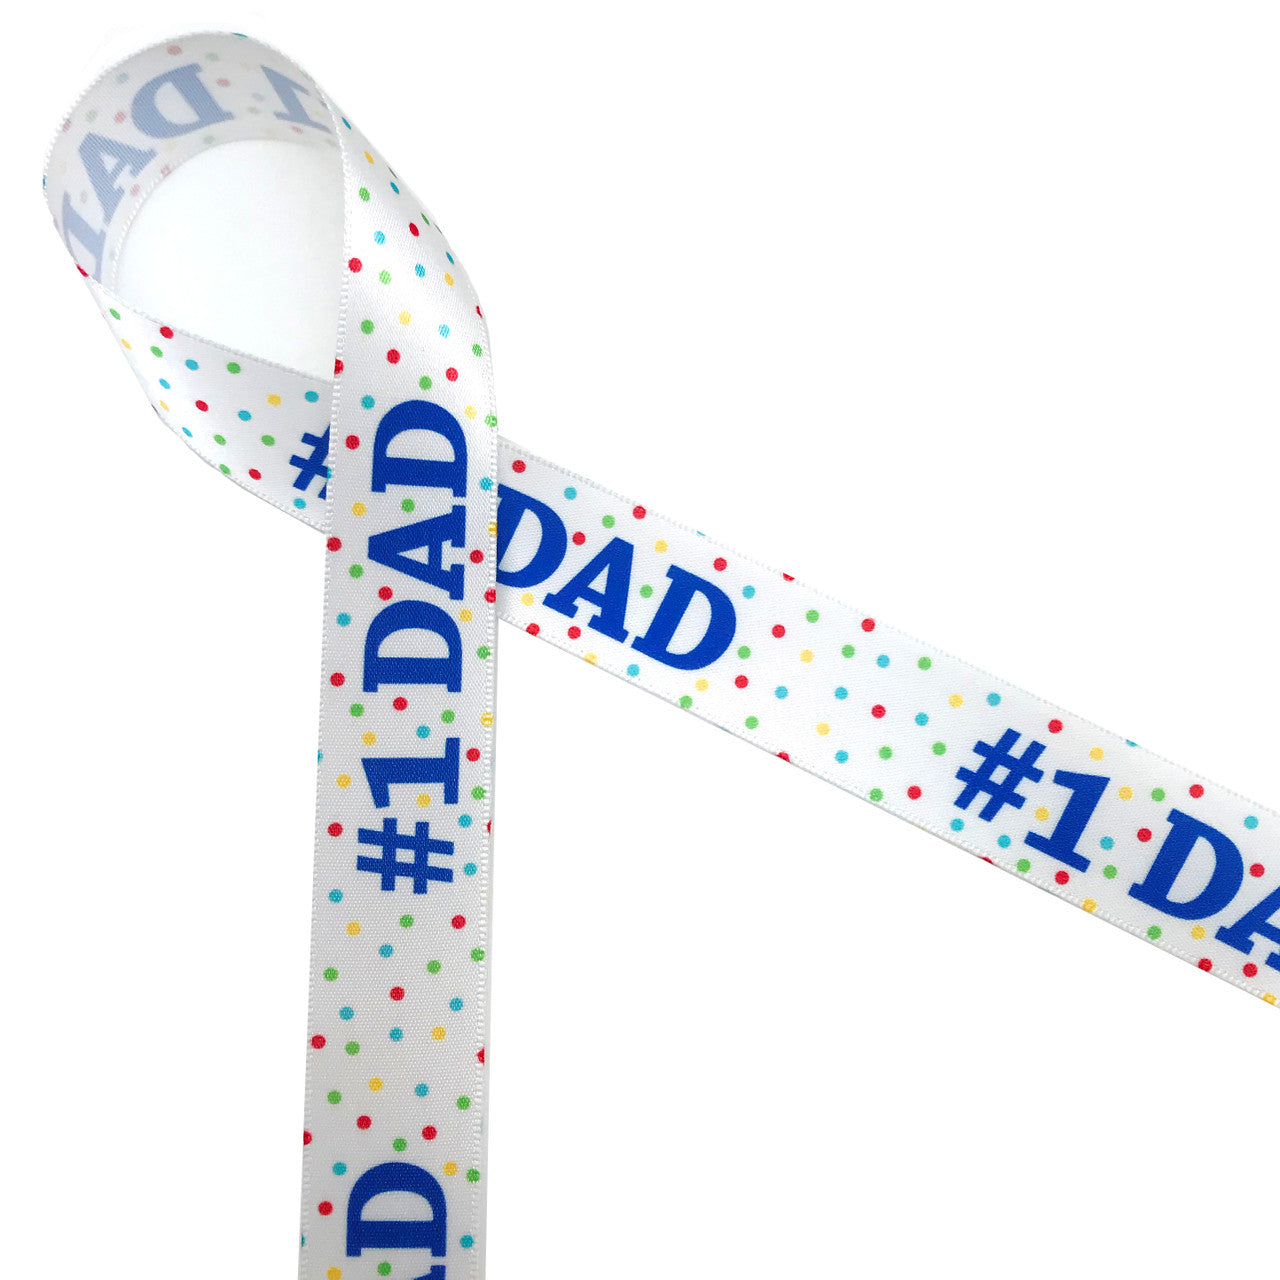 Father's Day RIbbon #1 Dad in royal blue with polka dots in primary colors printed on 7/8" white single face satin ribbon